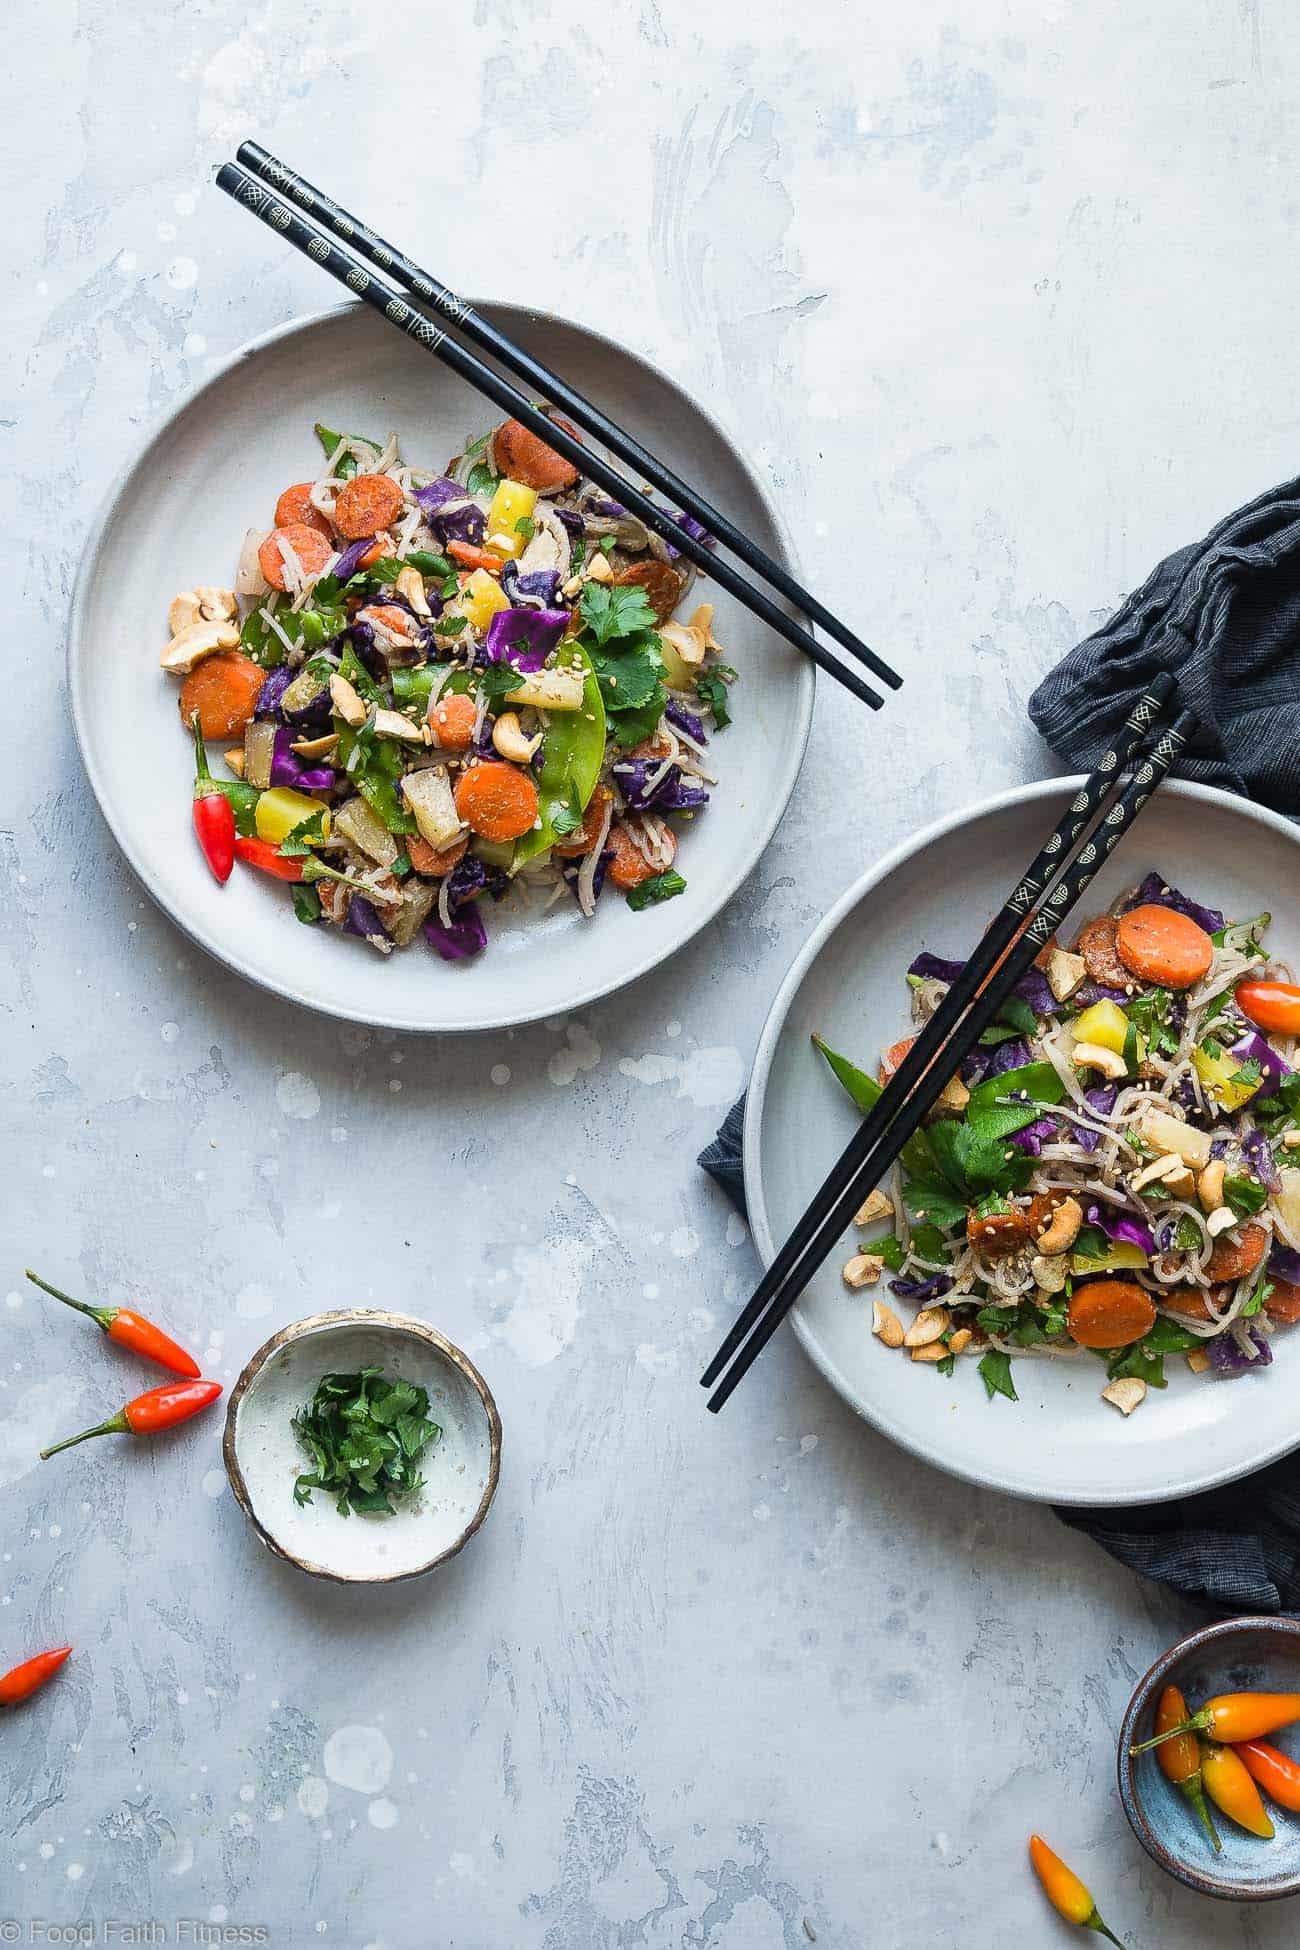 Vegan "Honey" Ginger Stir Fry with Cashew Cream  -  This Easy Healthy Vegetarian Stir Fry is a simple and quick vegan friendly dinner that is LOADED with vegetables and flavor! Even picky eaters will love this simple, dairy and gluten free recipe! | #Foodfaithfitness.com | #vegan #vegetarian #stirfry #glutenfree #healthy